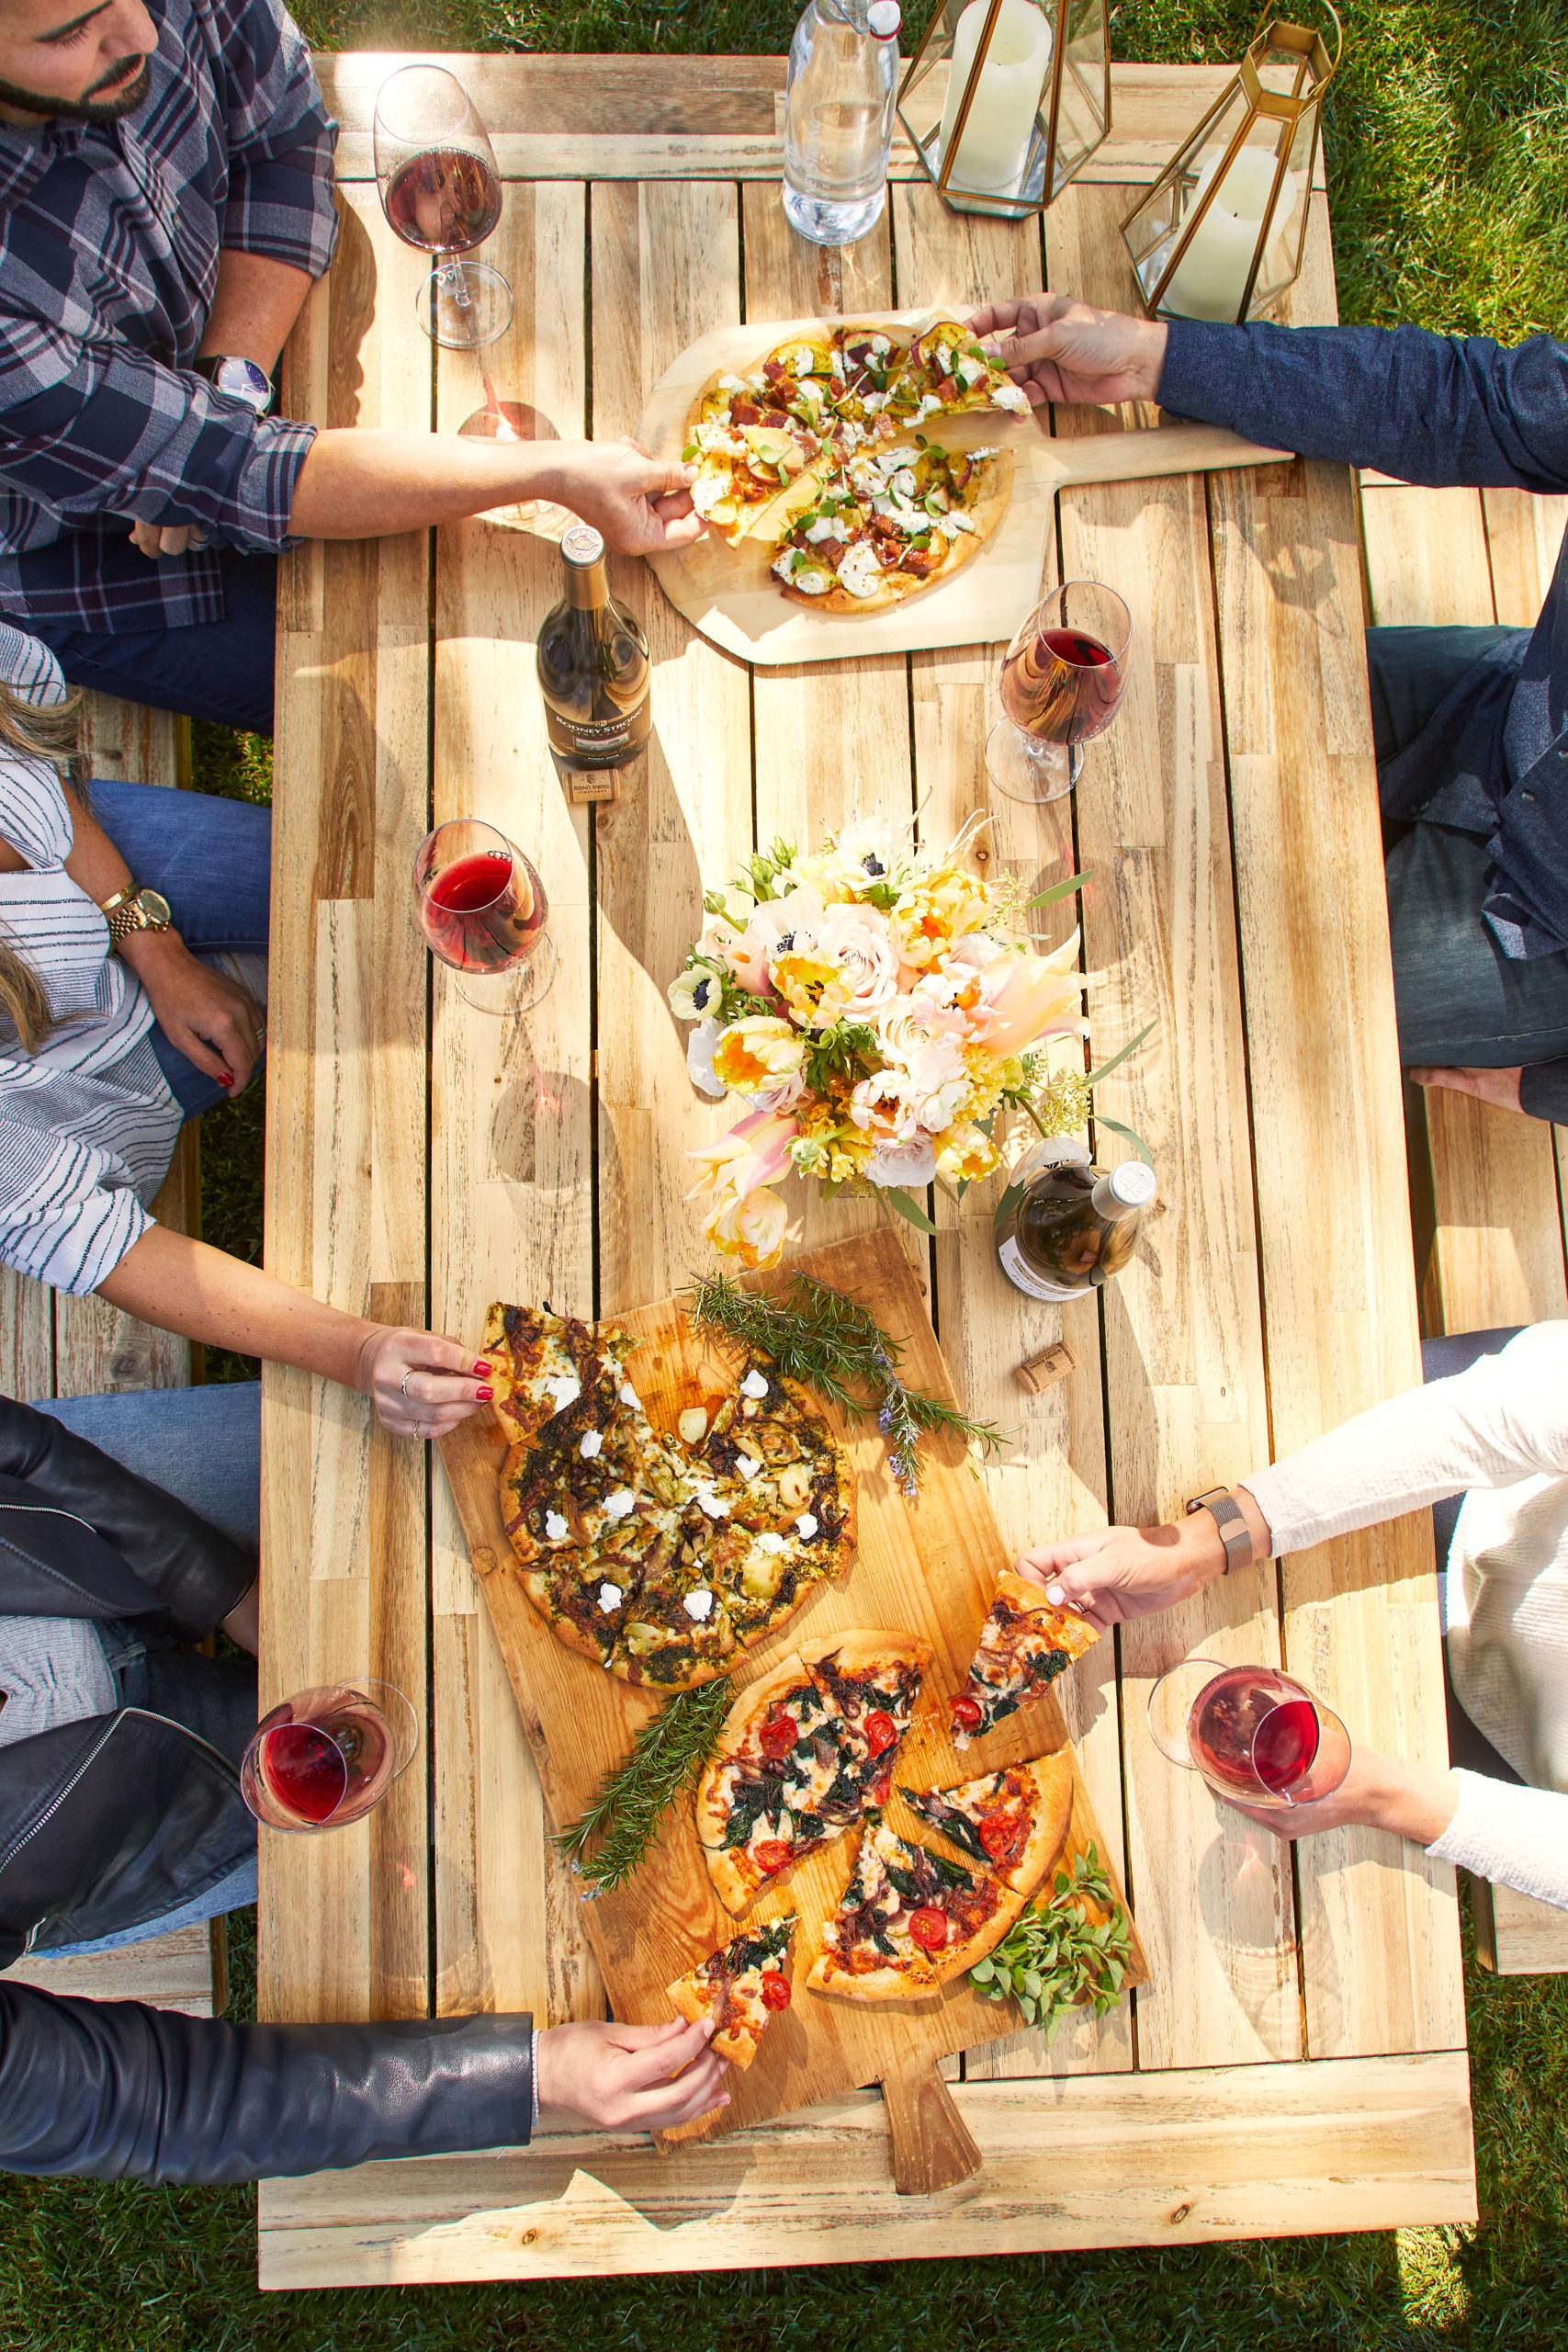 Several arms reach across a light wood picnic table laden with glasses of wine, fire roasted pizzas, lanterns and flowers in the afternoon light